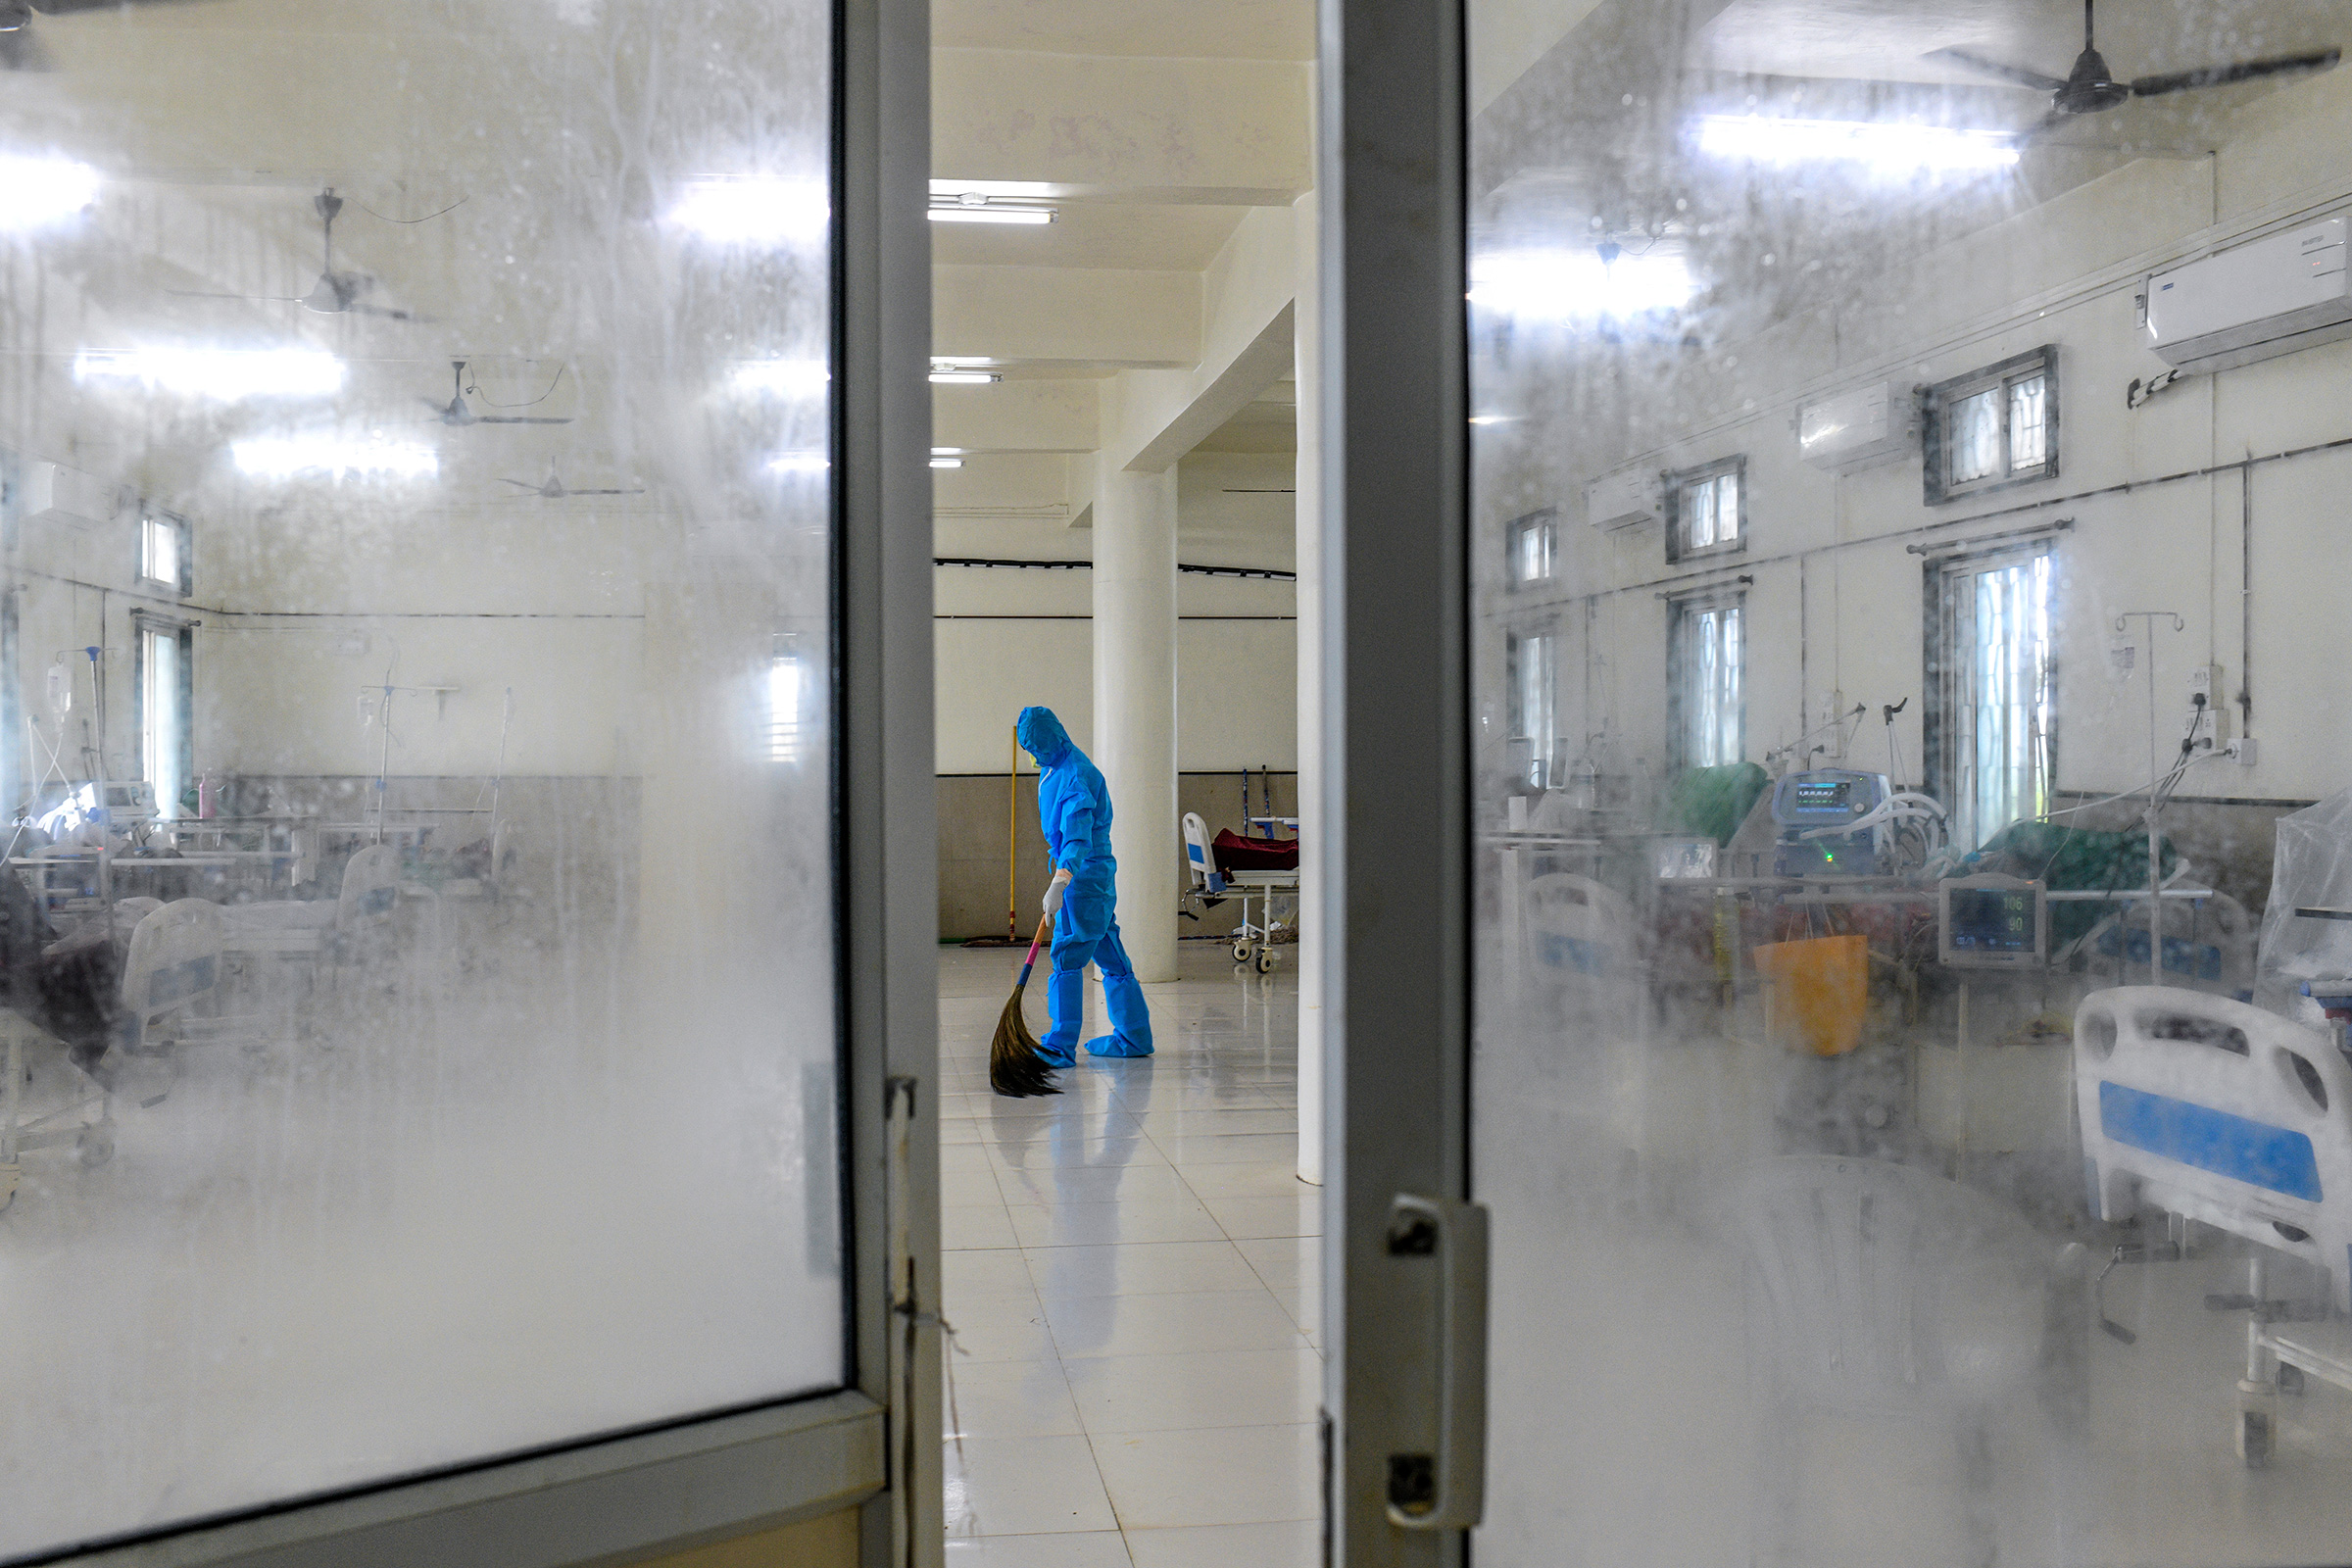 A young worker dressed in personal protective equipment sweeps the floor of the intensive-care unit. (Atul Loke for TIME)